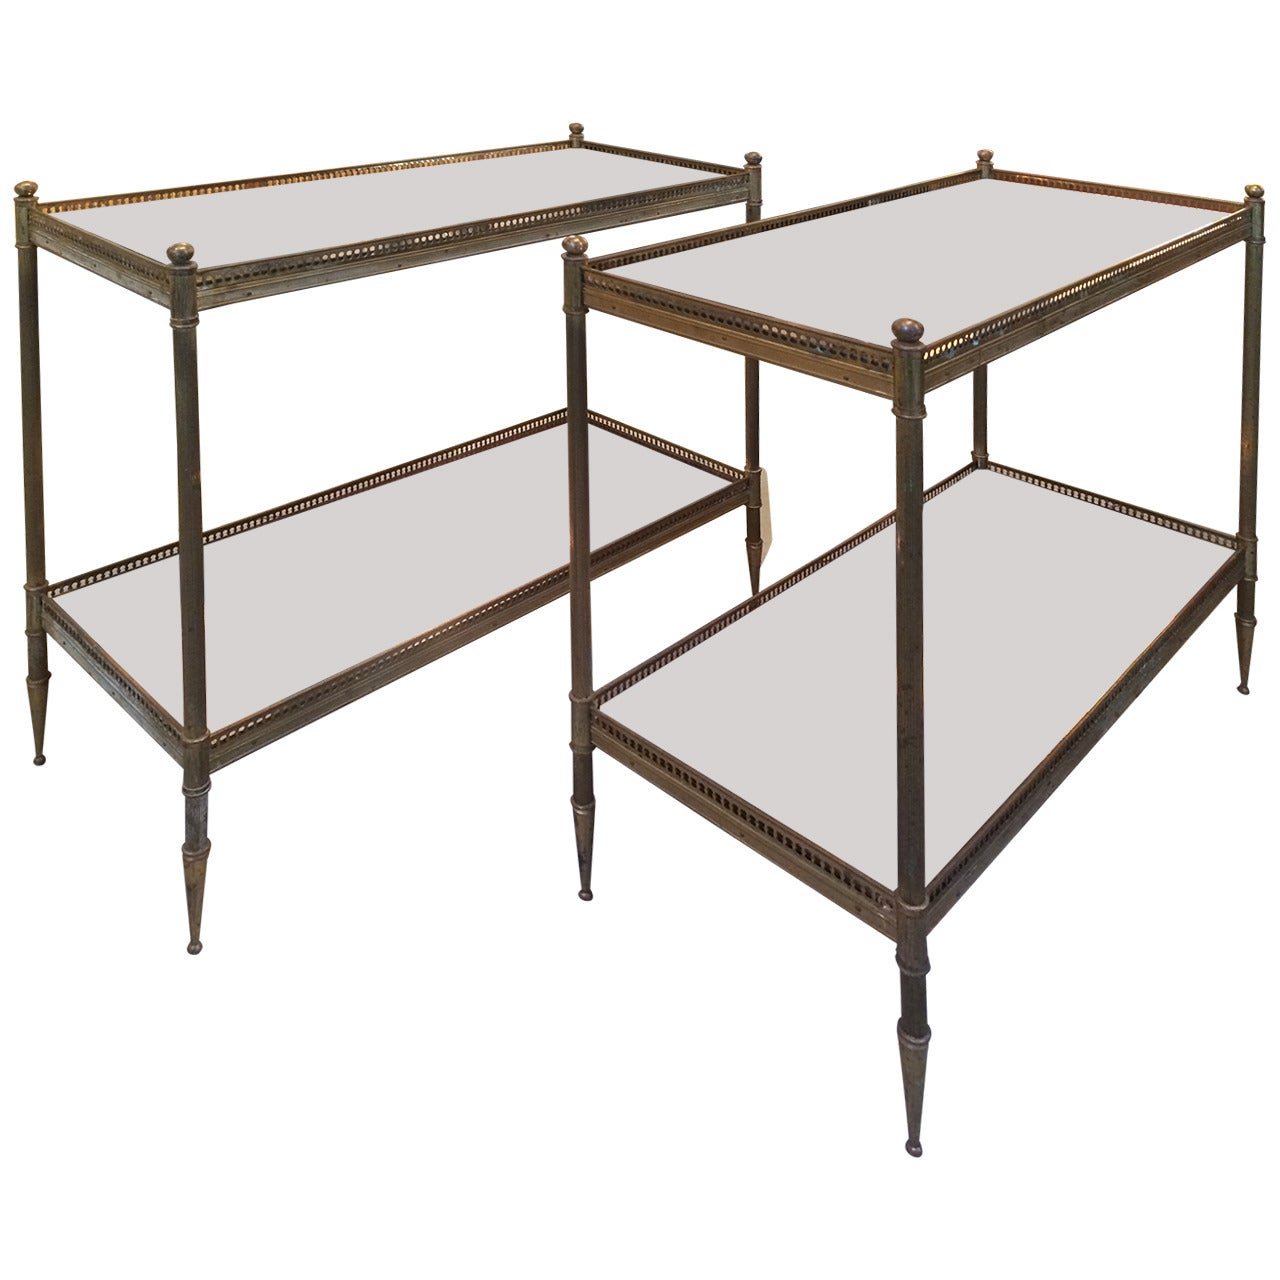 Maison Jansen 1940s Refined Pair of Two-Tier Side Tables with Mirrored Top For Sale